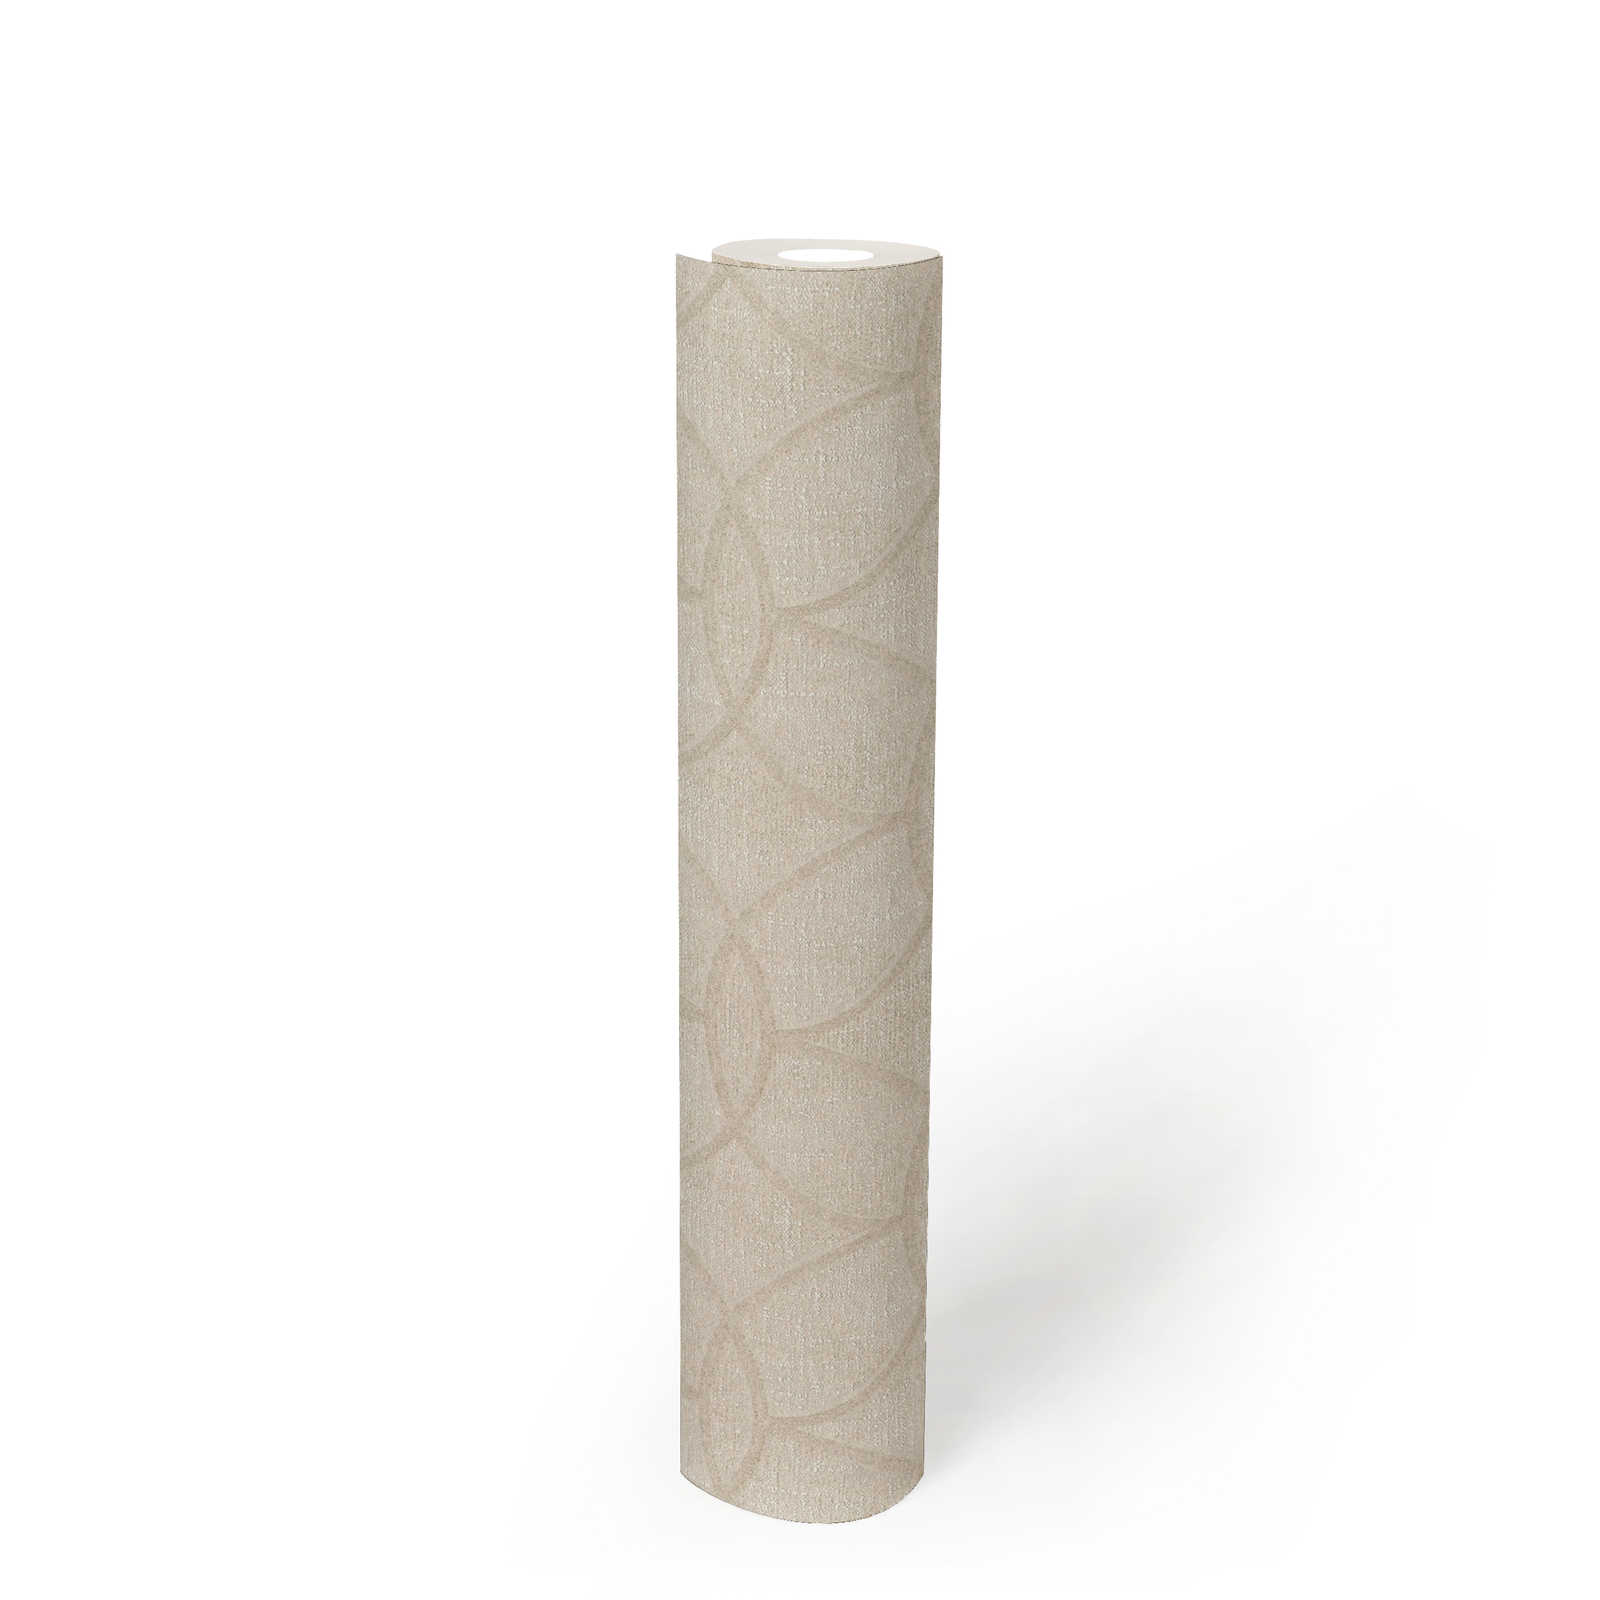             Retro wallpaper with geometric pattern with shine & shimmer effect - beige
        